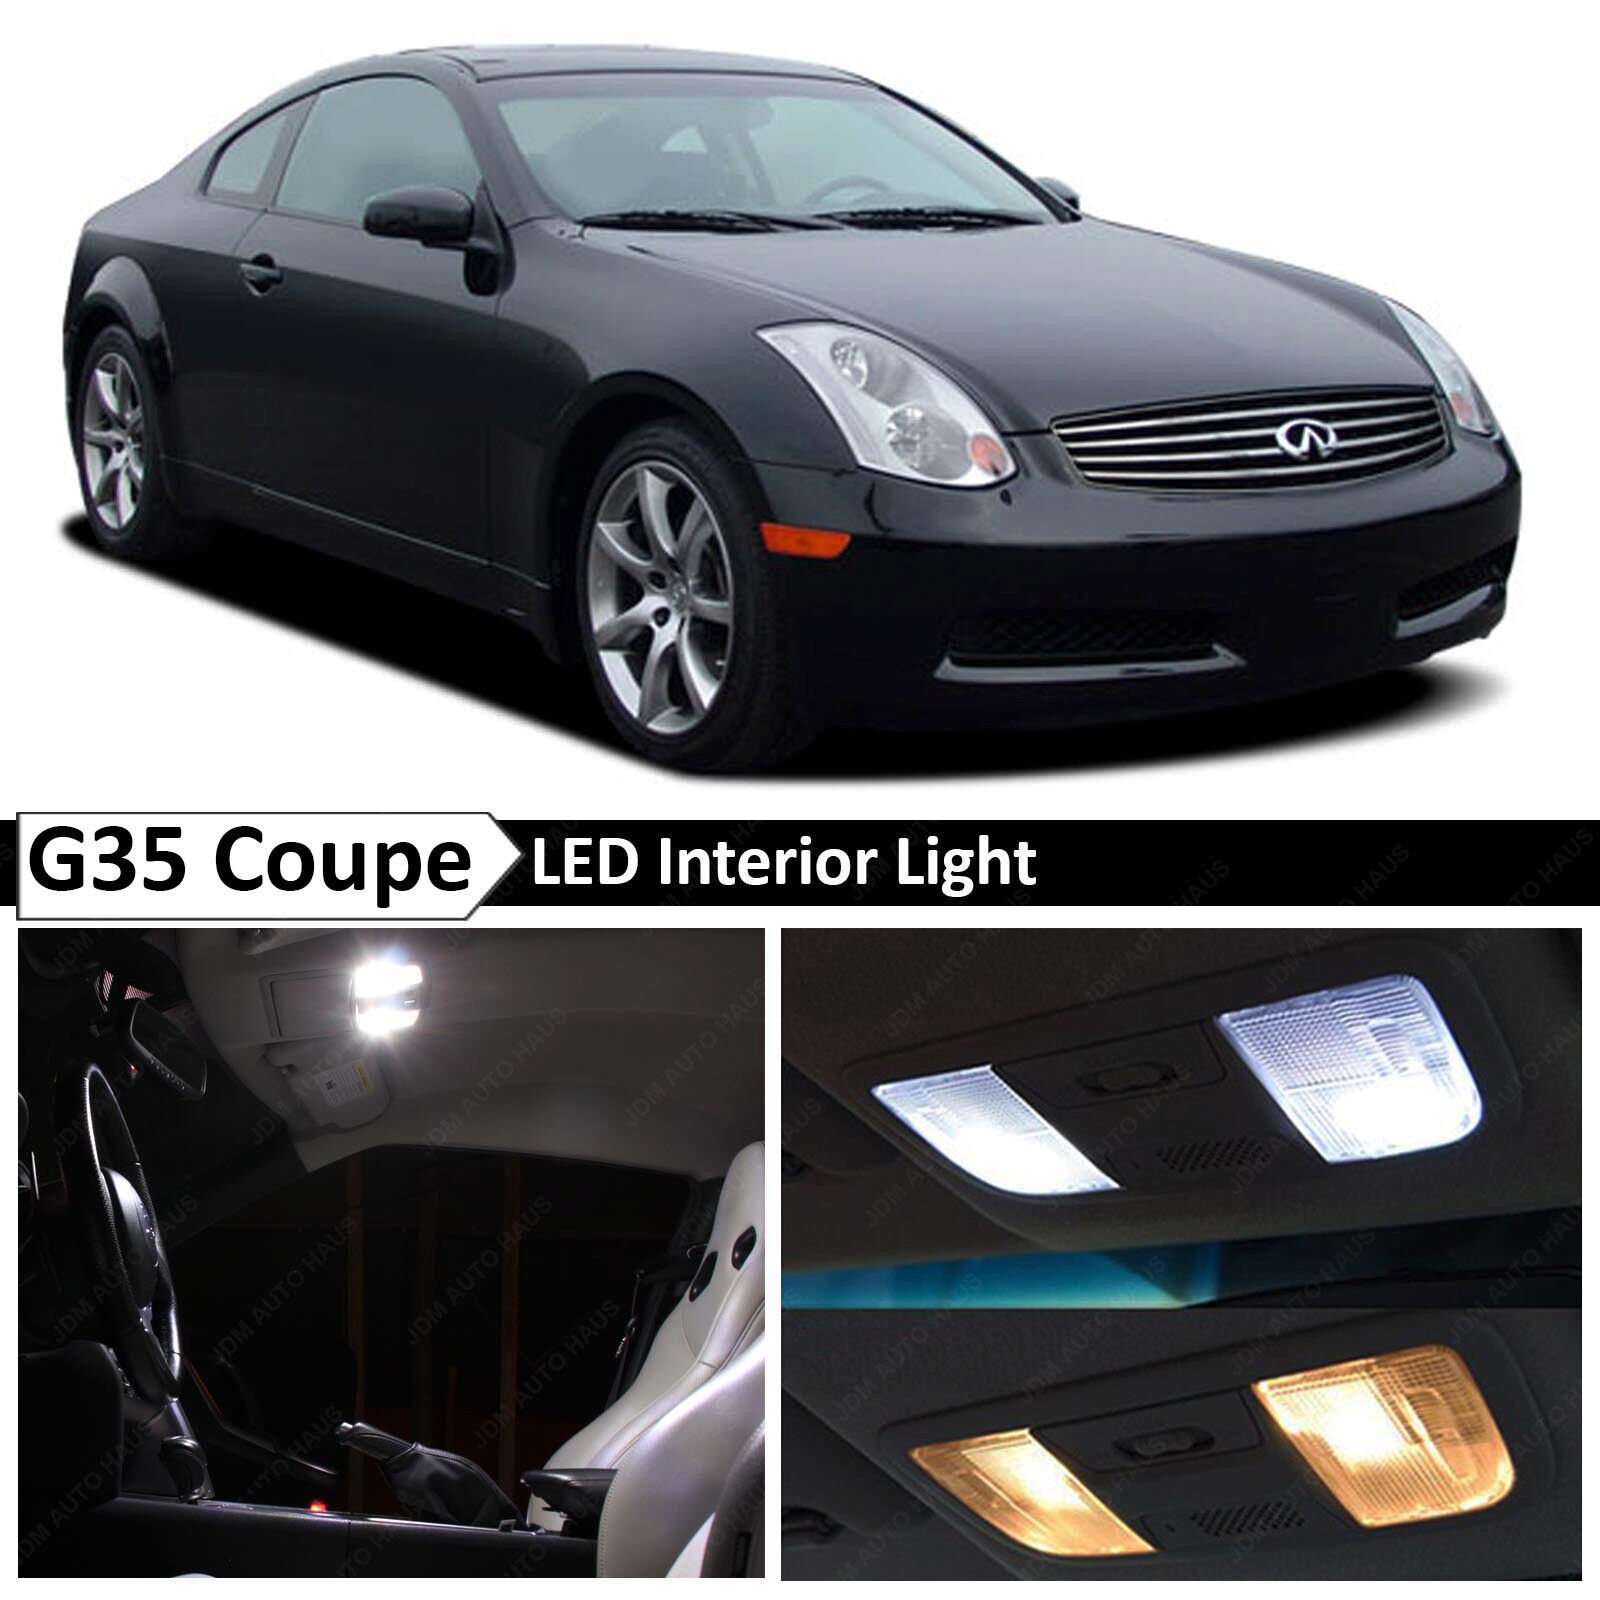 White Interior LED Lights Package Kit Fit 2003-2007 Infiniti G35 Coupe